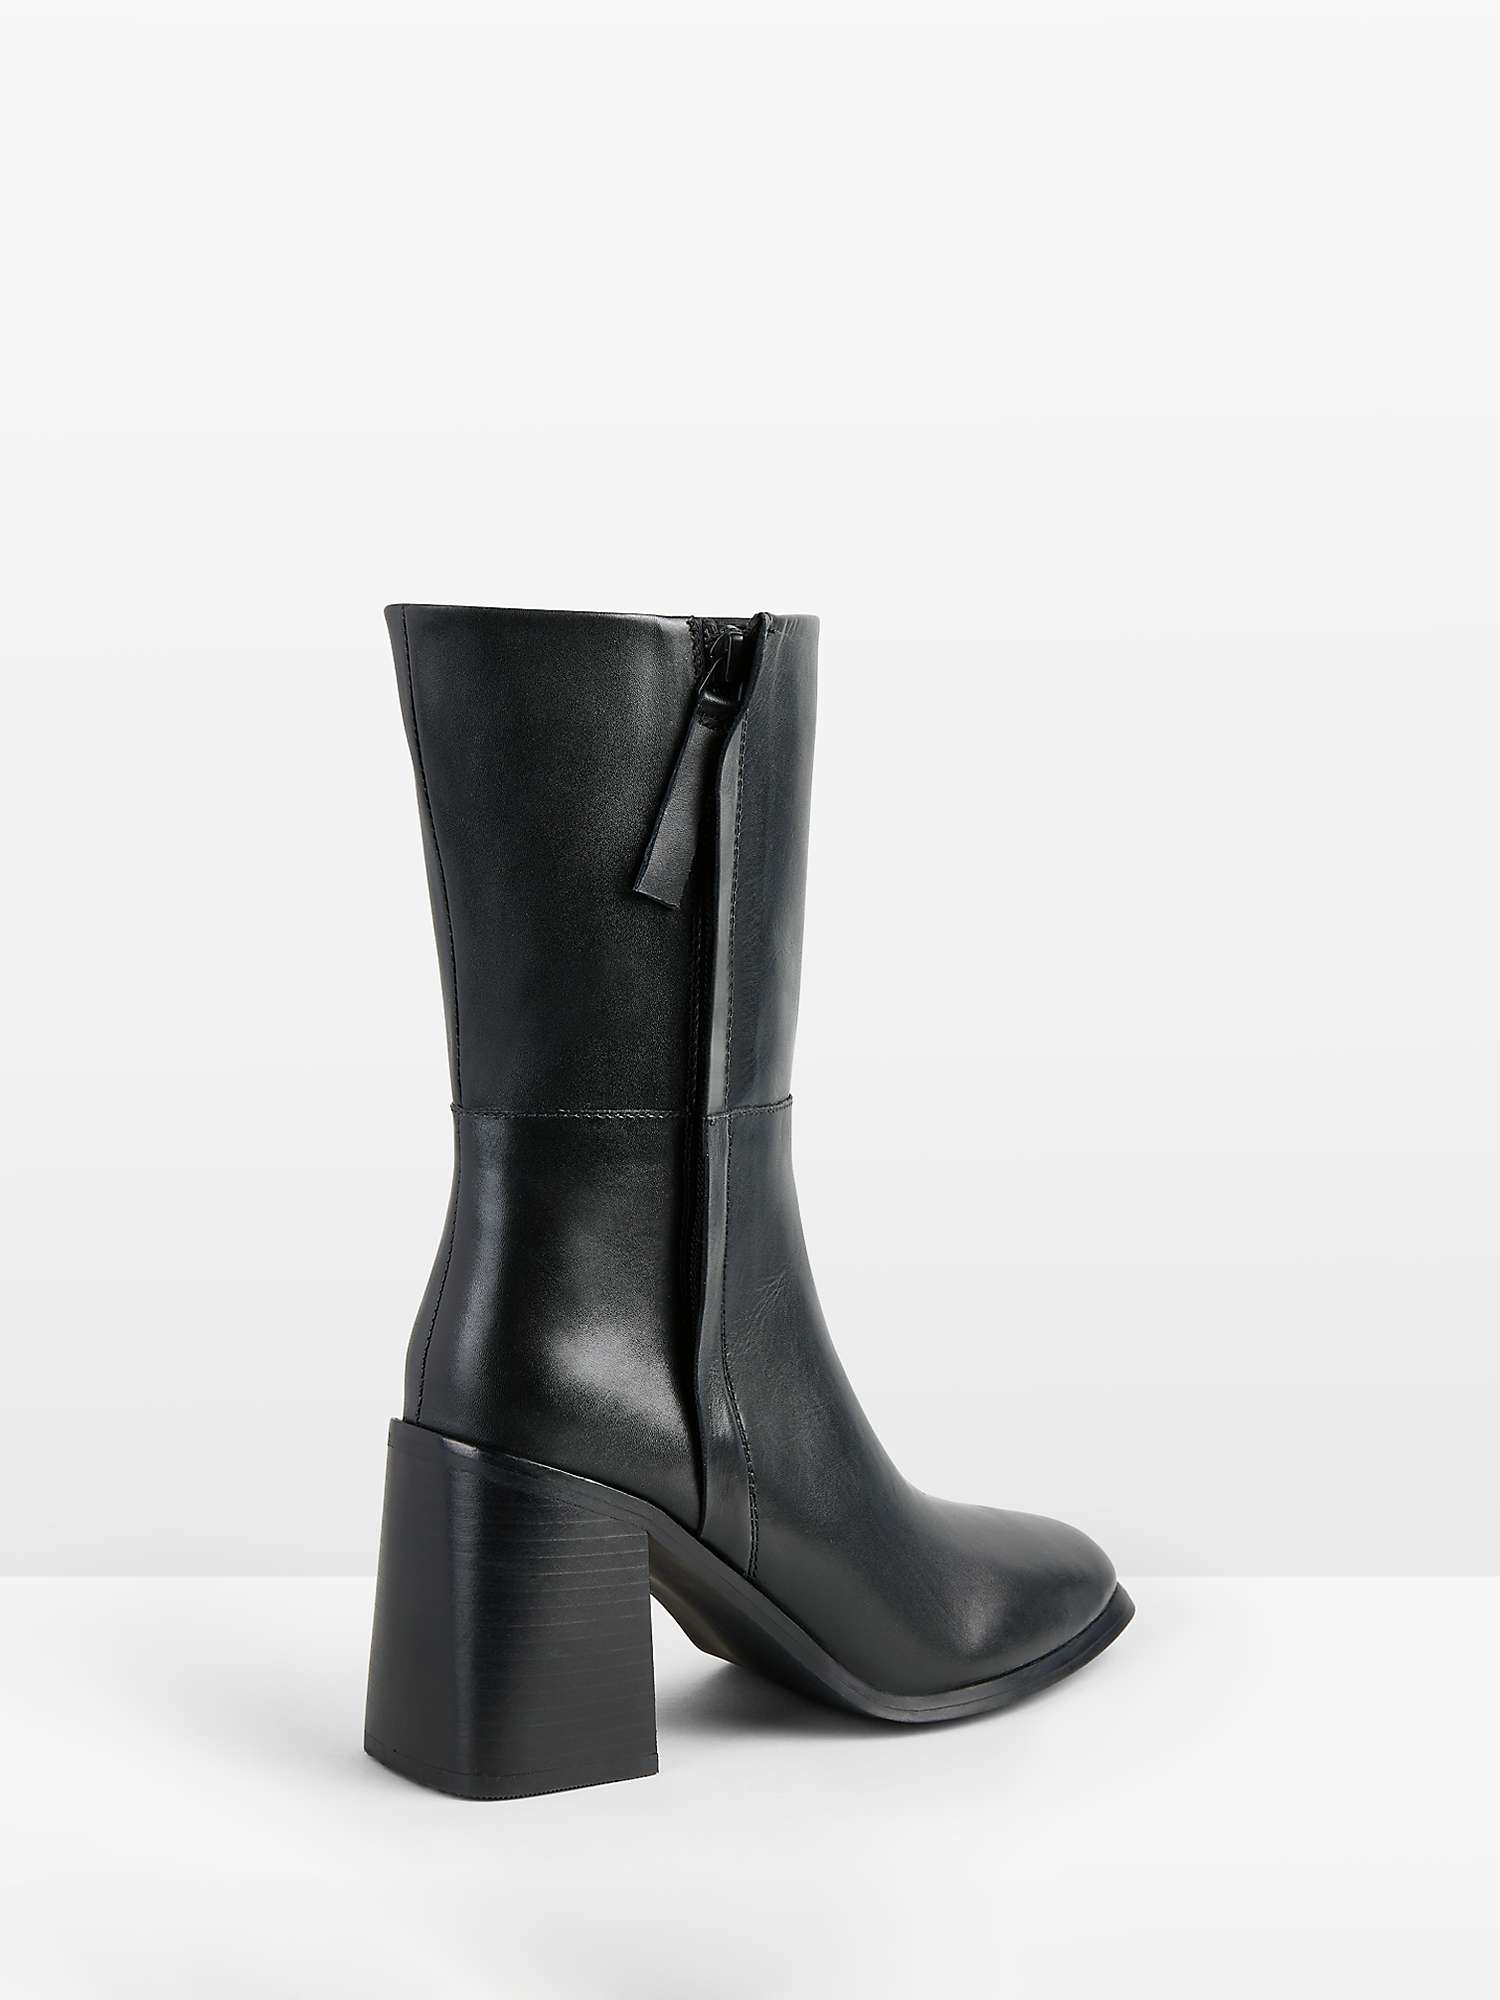 HUSH Finch Leather Chunky Heel Calf Boots, Black at John Lewis & Partners